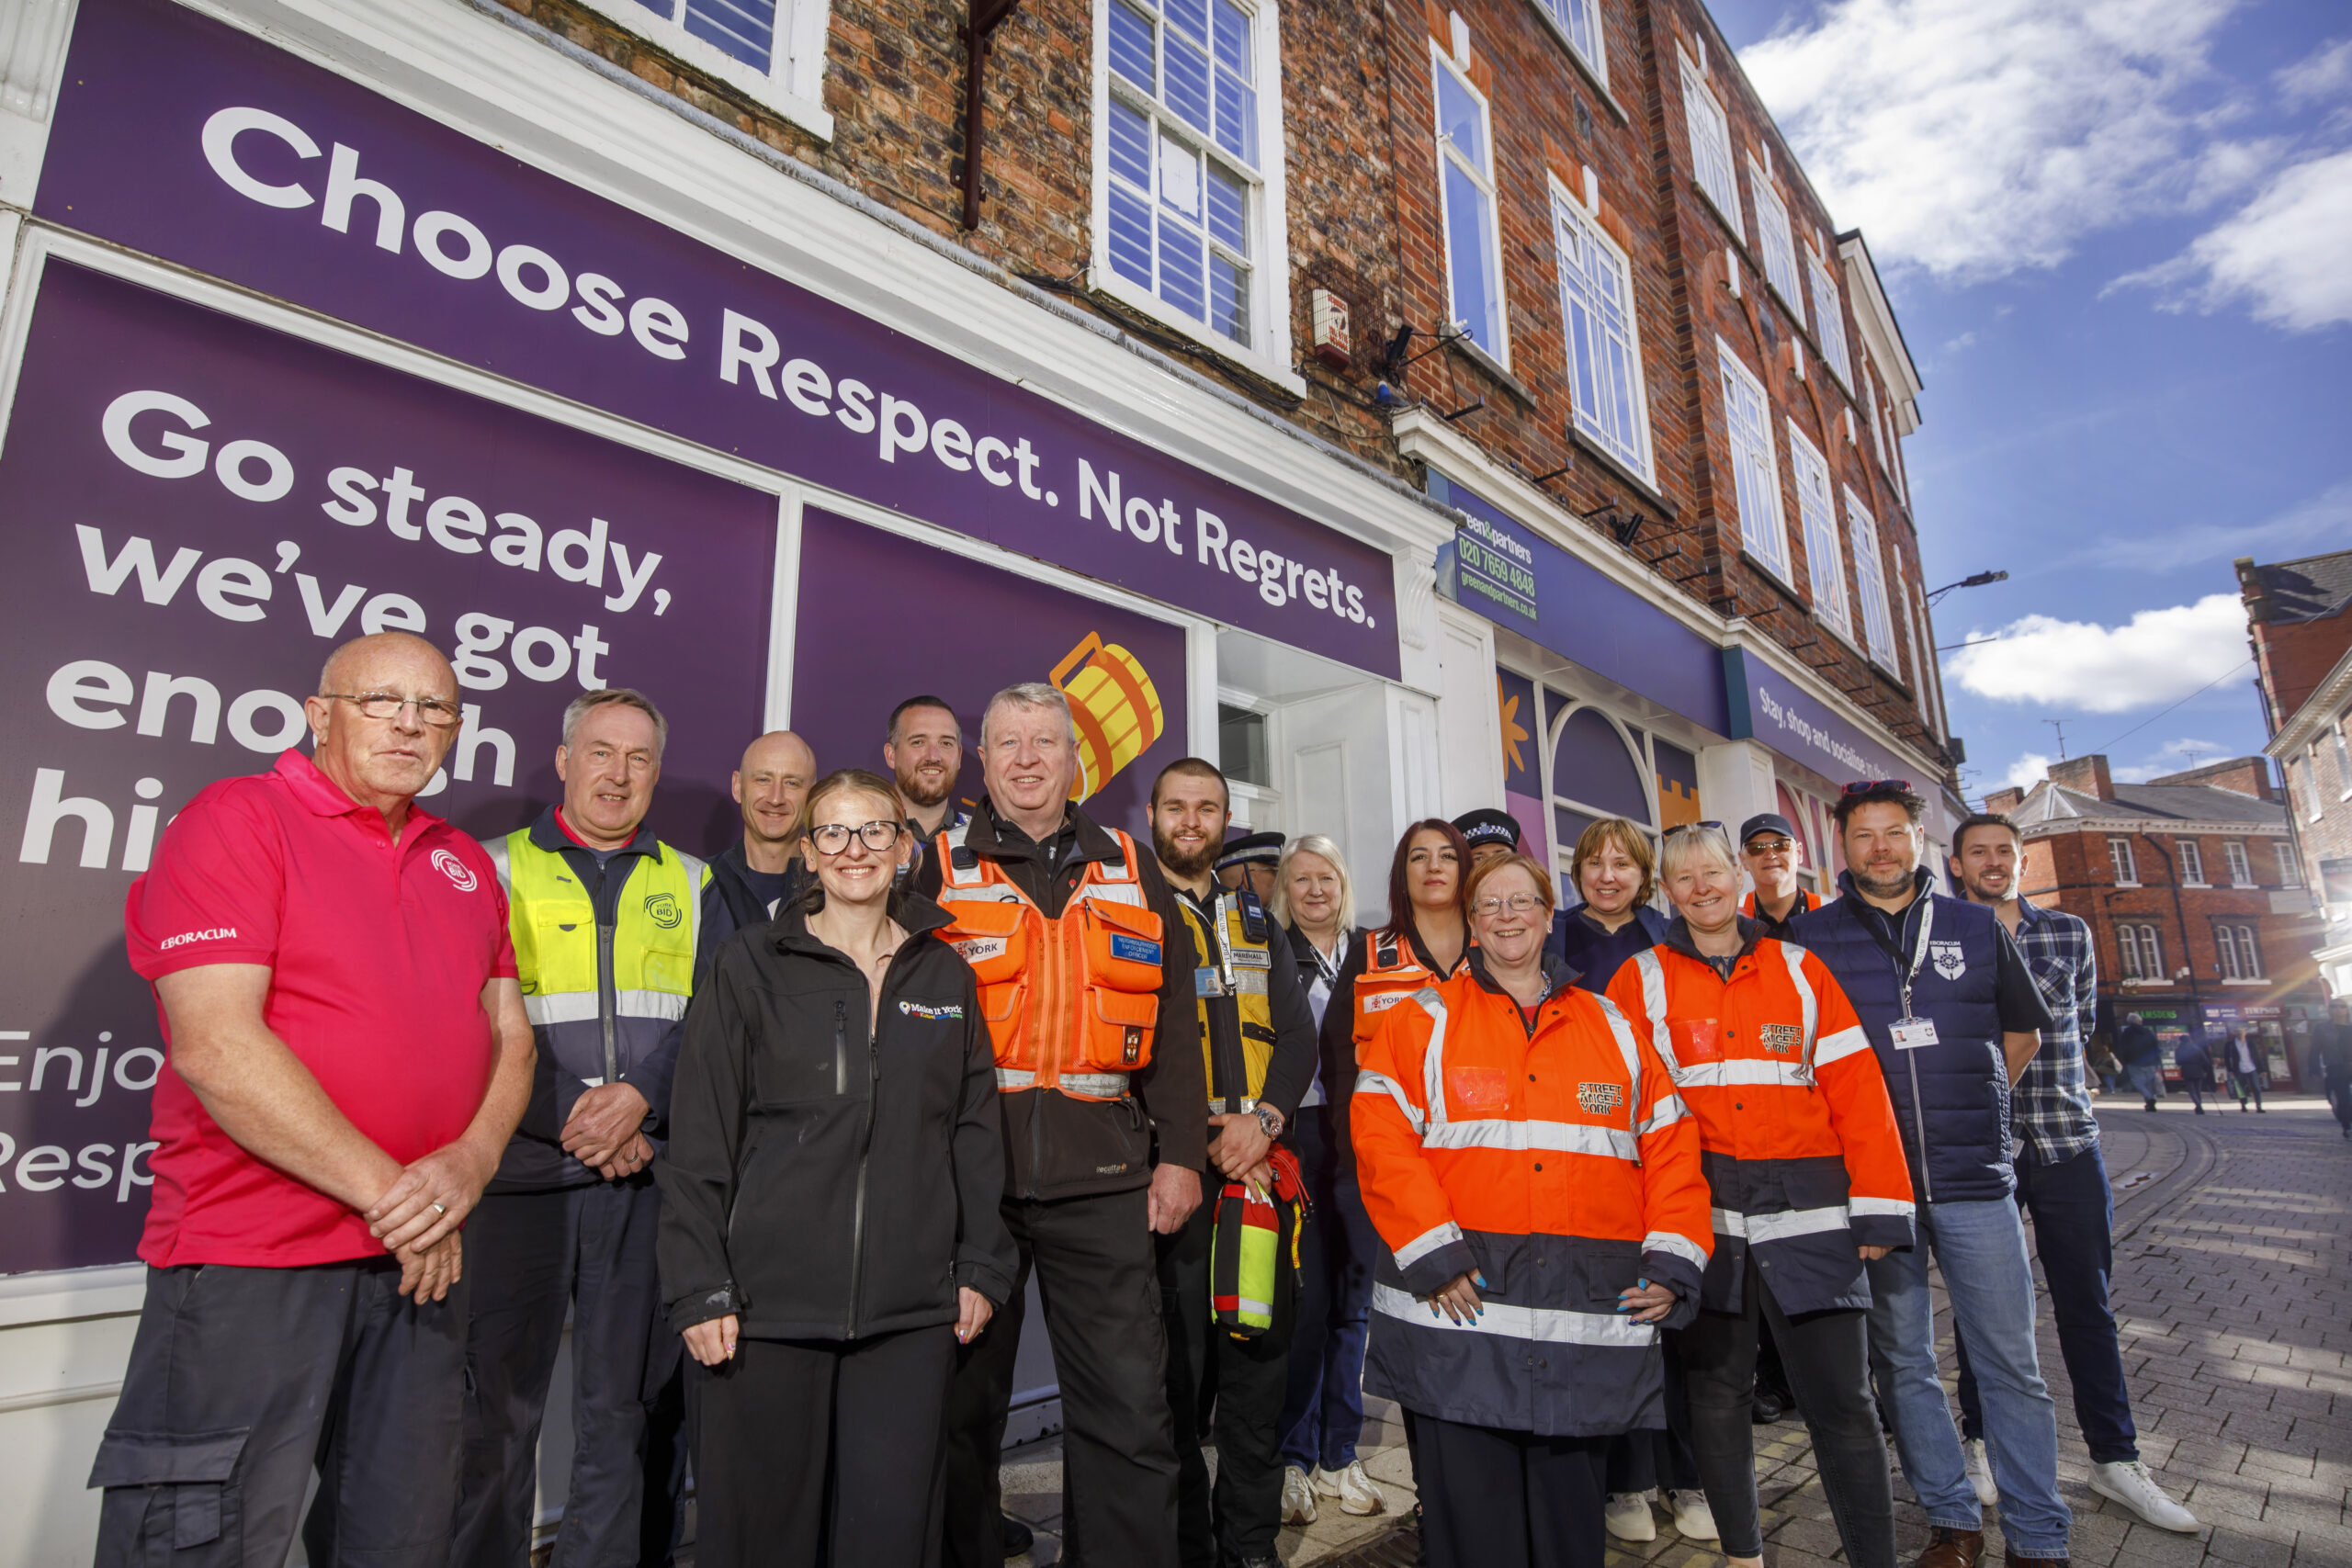 York BID and partners standing outside a 'Choose Respect, Not Regrets' shop wrap